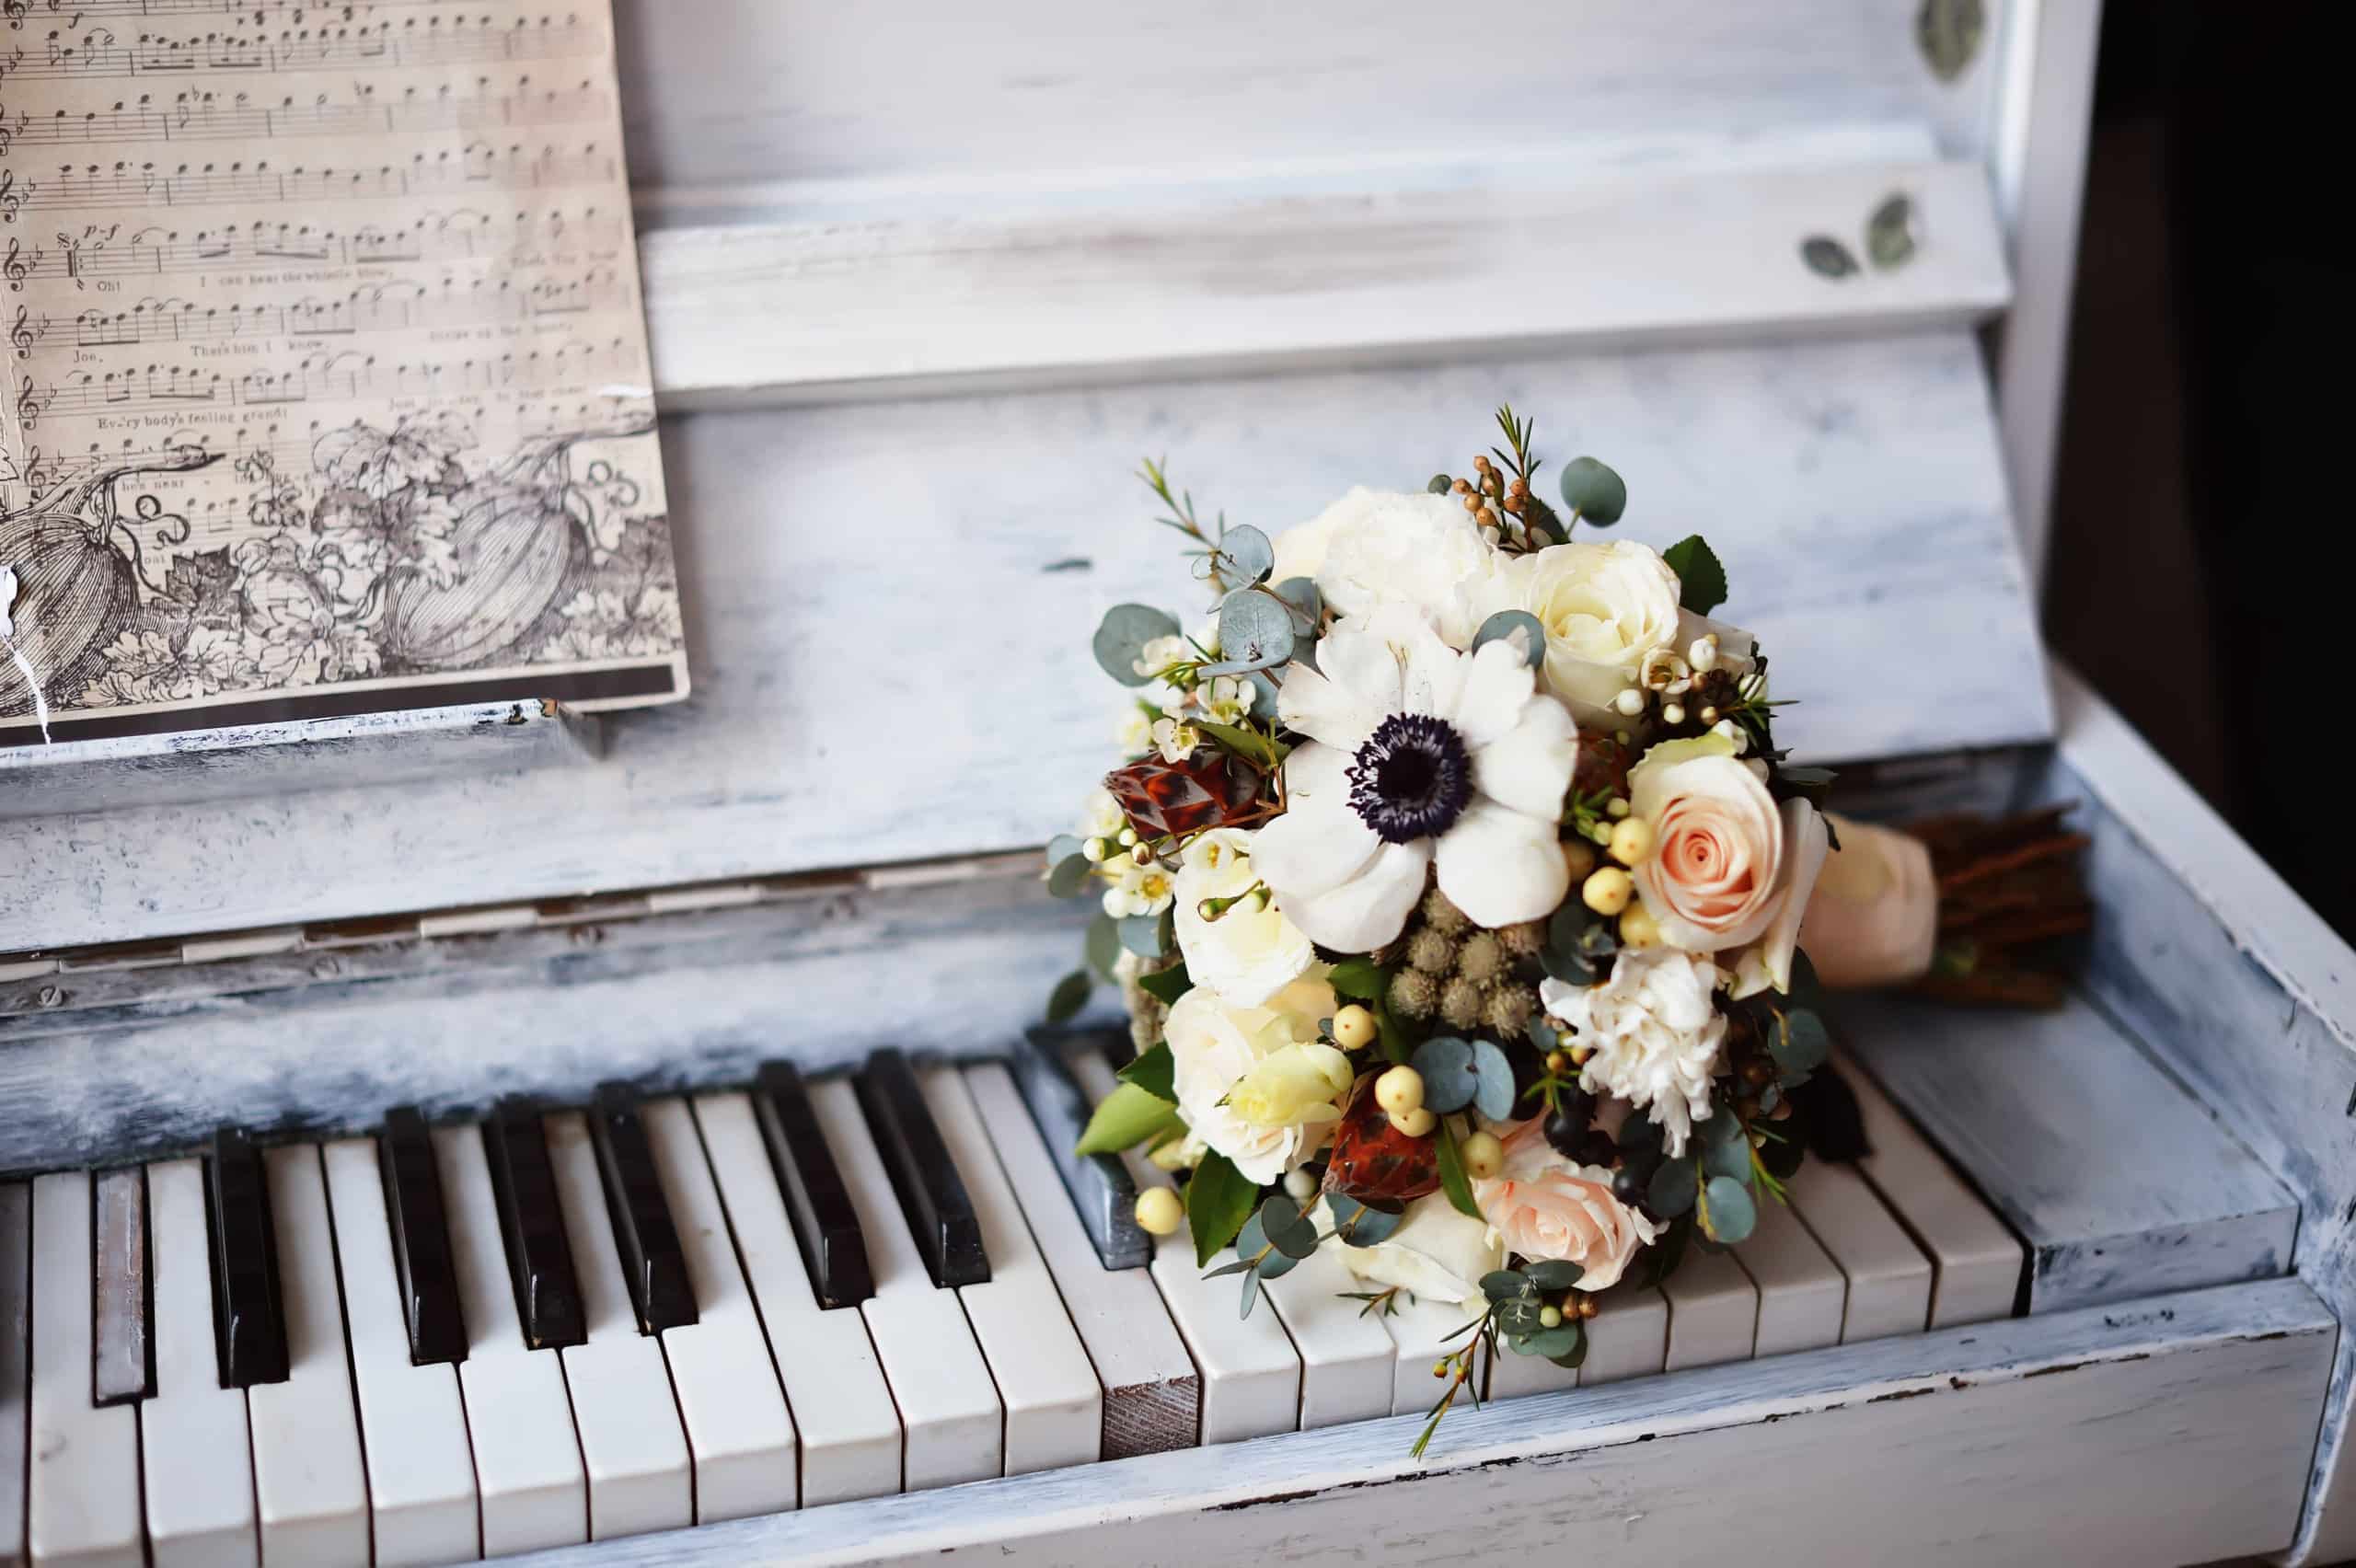 Bridal bouquet on the piano.